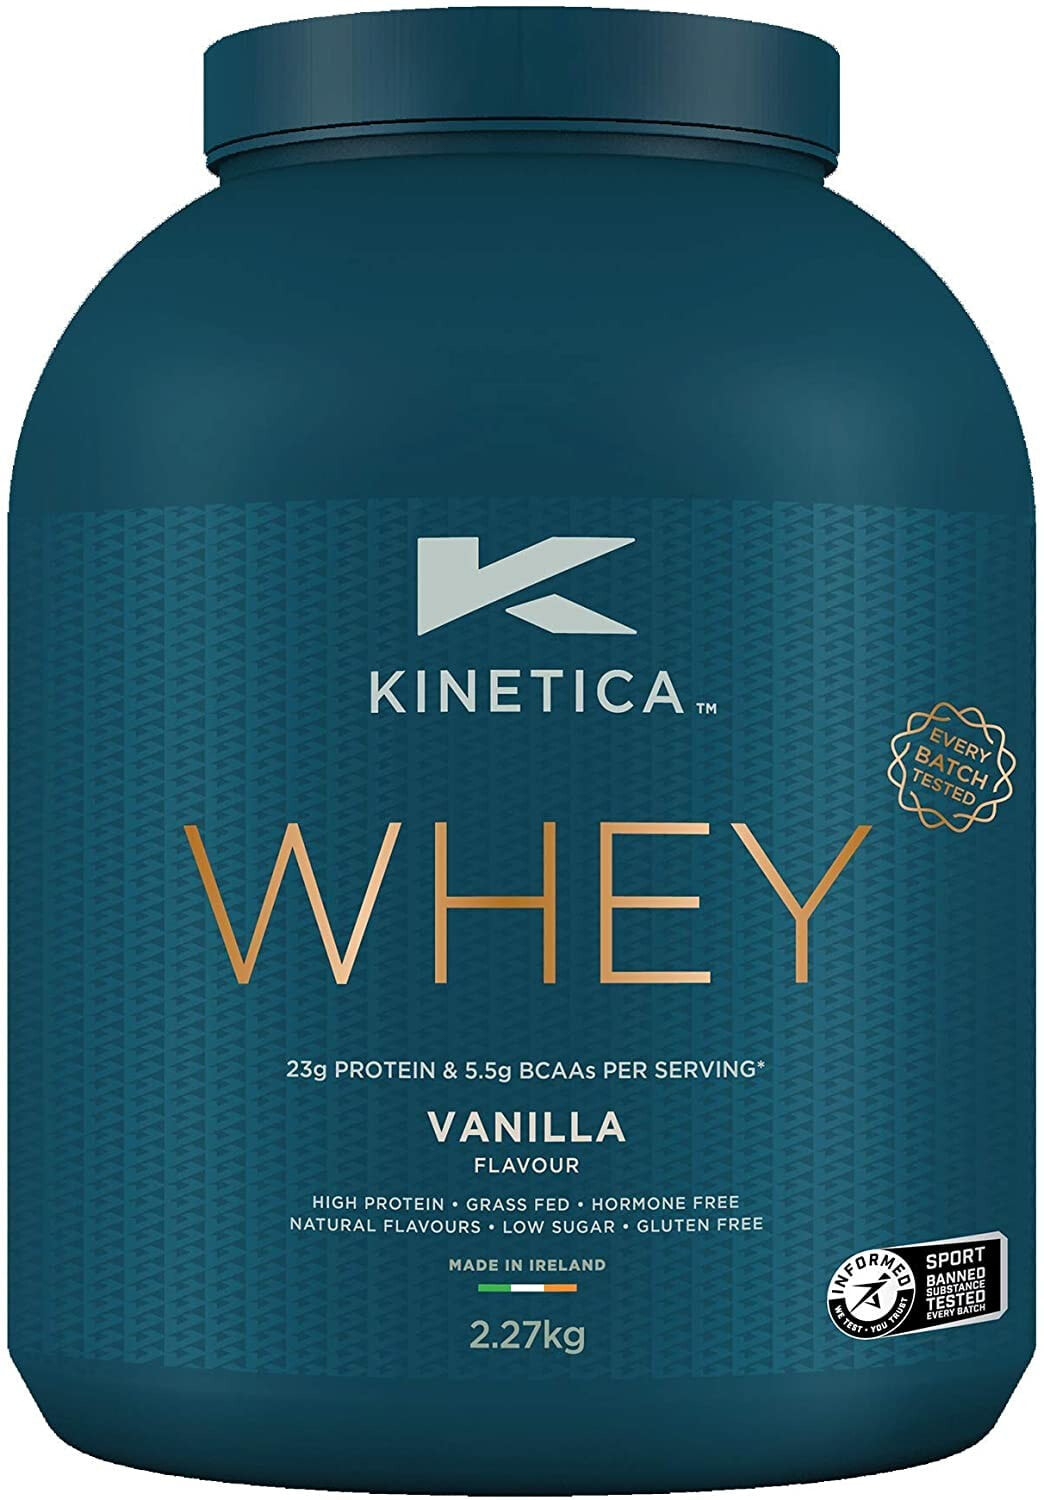 Kinetica Protein Powder Chocolate 2.27 kg, Whey Protein, 23 g Protein, 76 Servings Including Free Measuring Cup, Protein Powder, Whey Protein Powder from EU Pasture Keeping, Super Solubility and Pure Taste